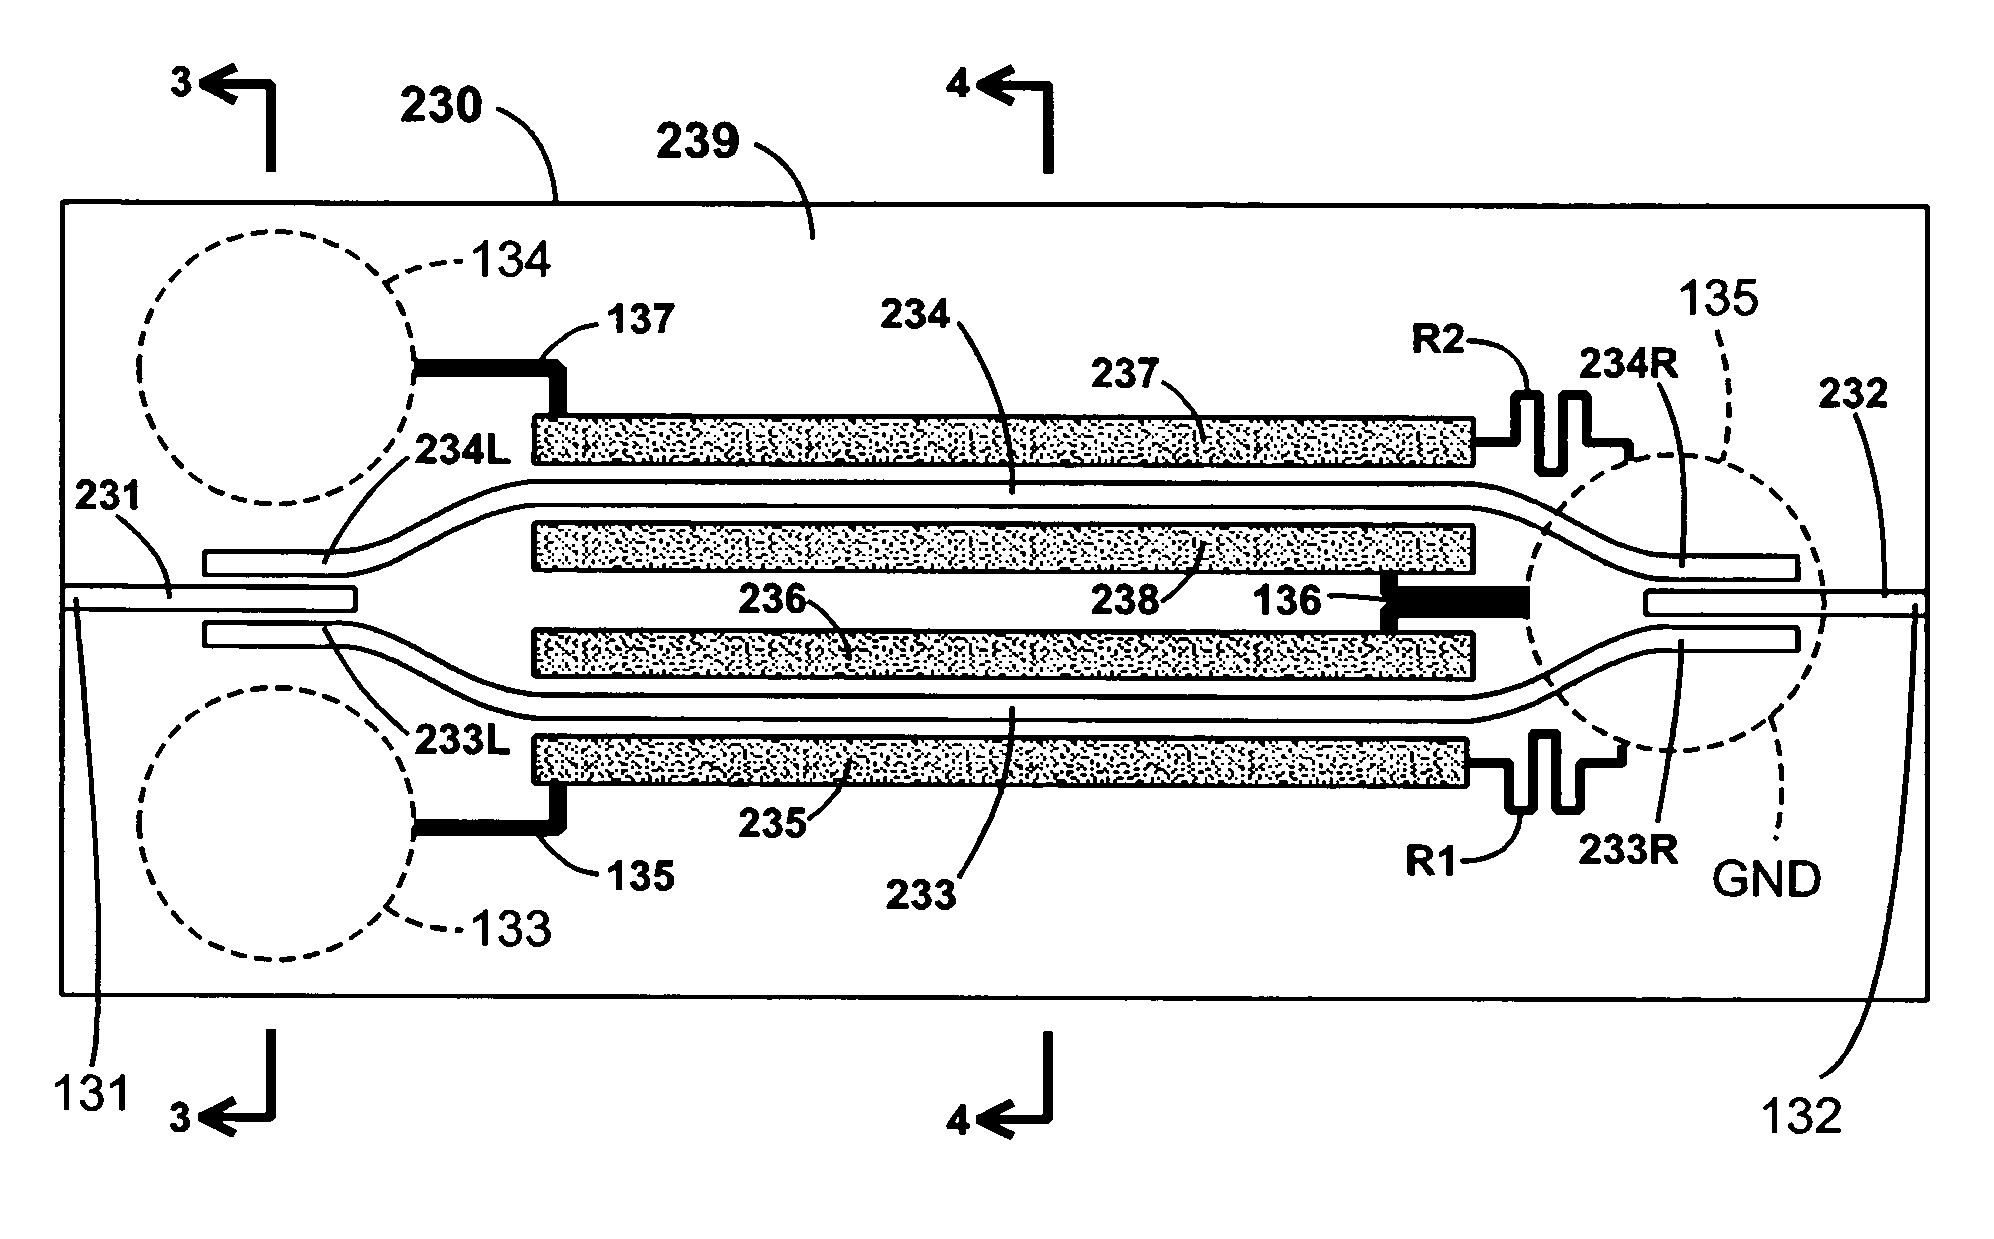 Optical interconnect apparatuses and electro-optic modulators for processing systems